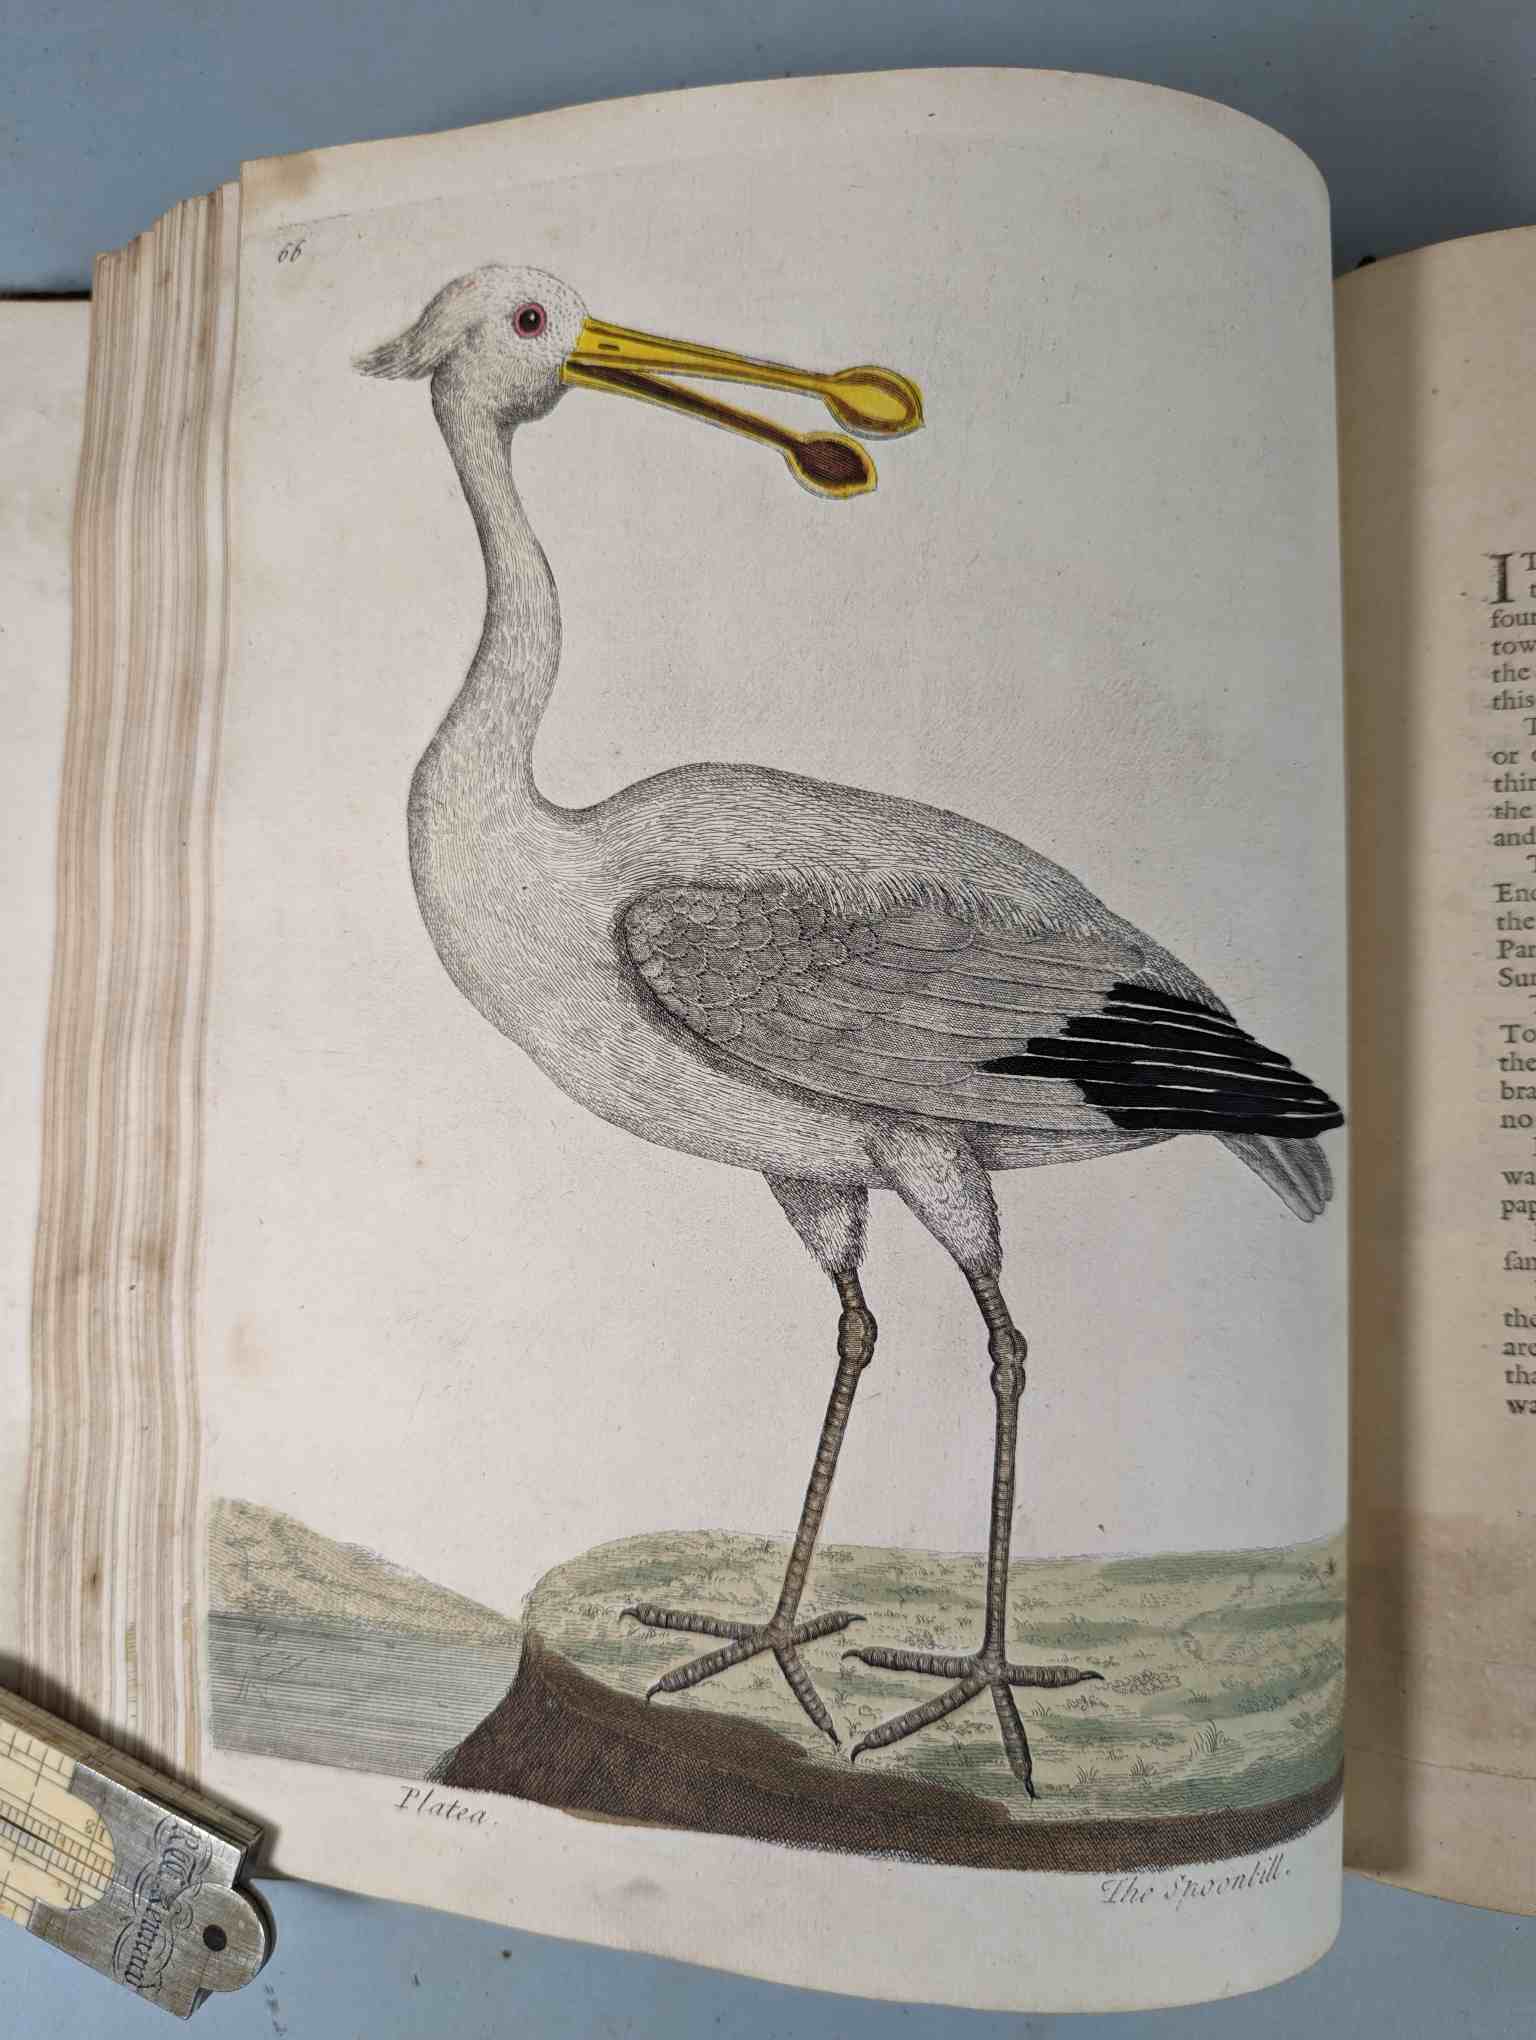 ALBIN, Eleazar. A Natural History of Birds, to which are added, Notes and Observations by W. - Image 170 of 208